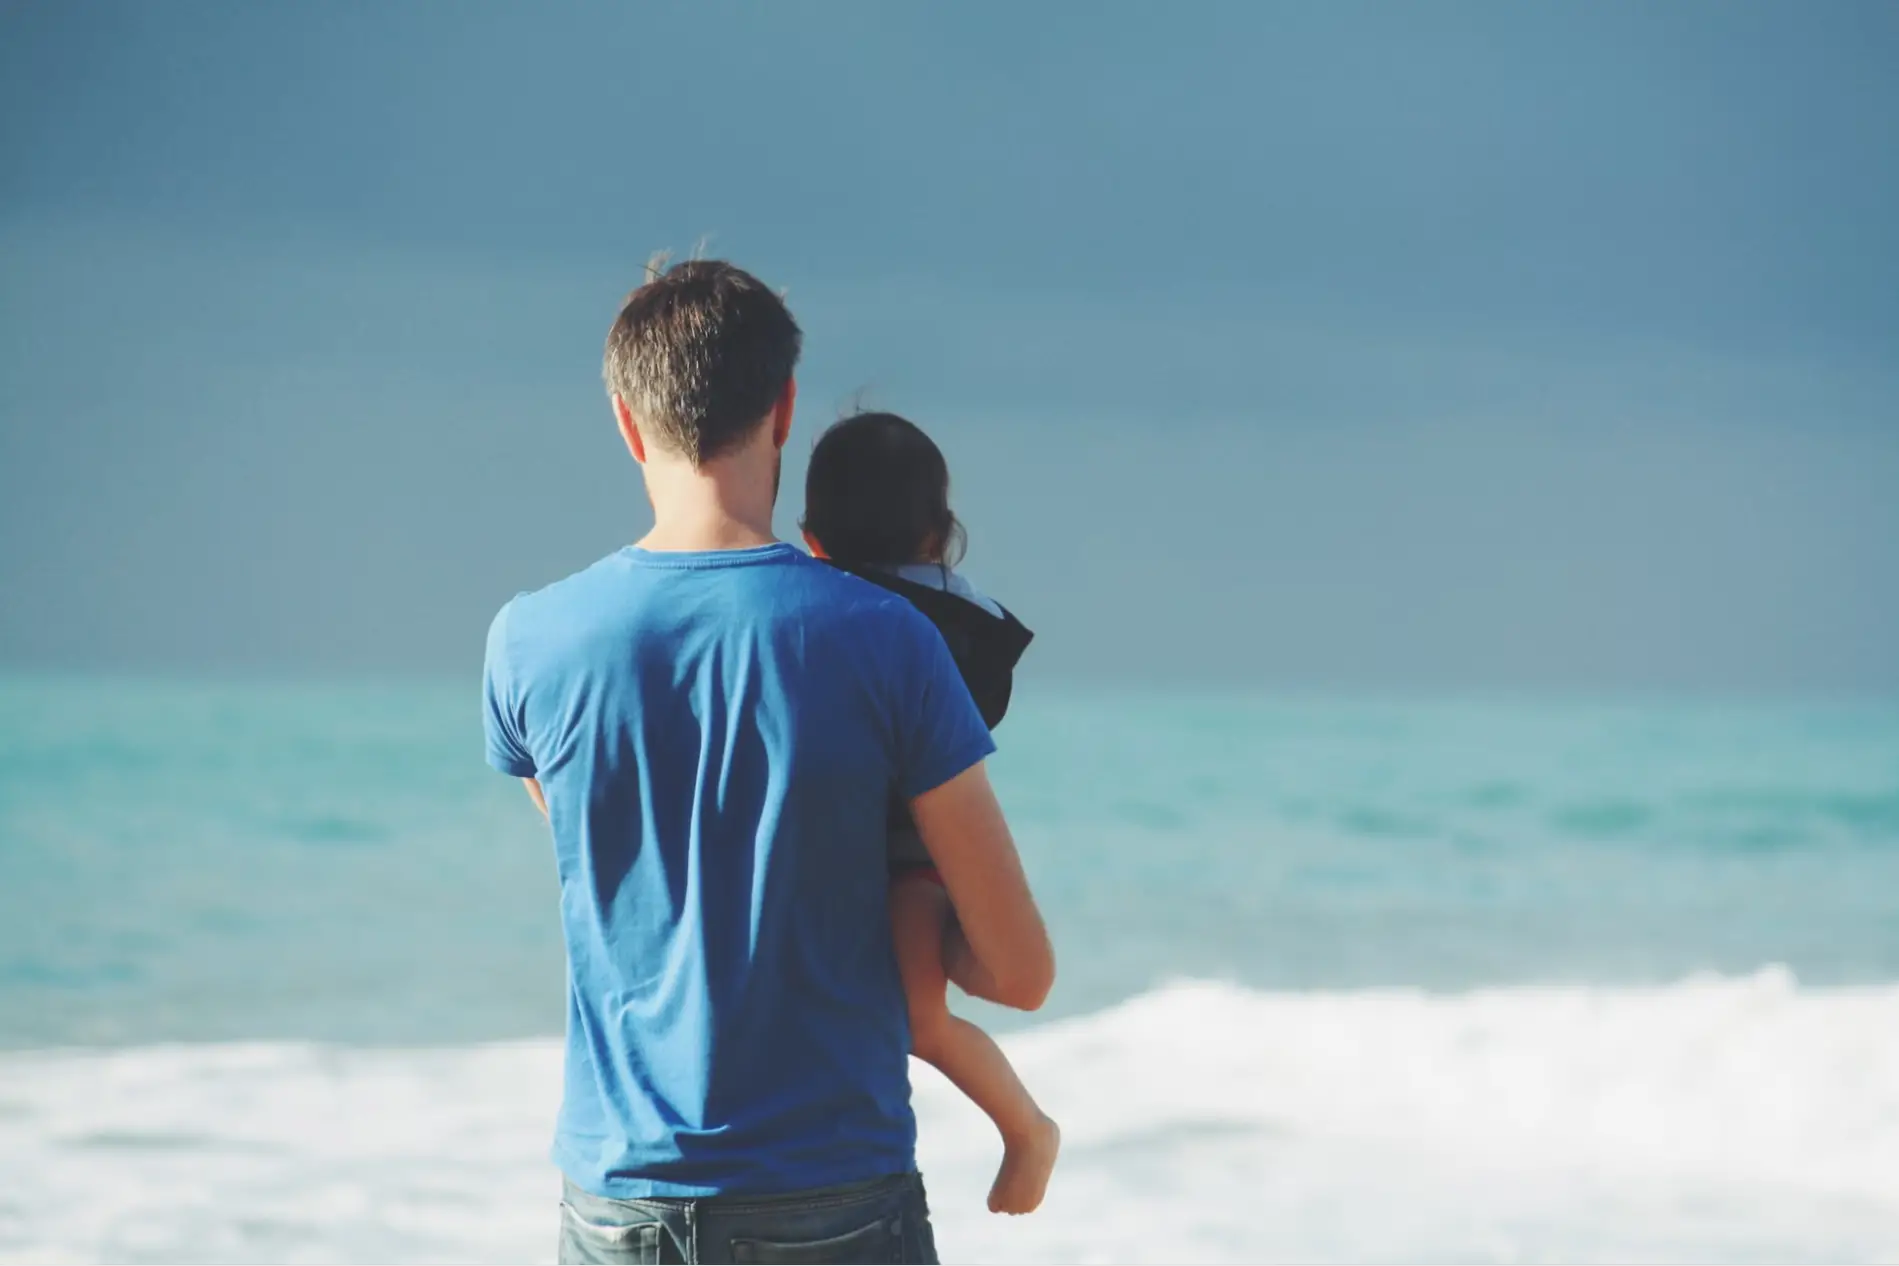 This is an image of a parent holding their child on the beach.